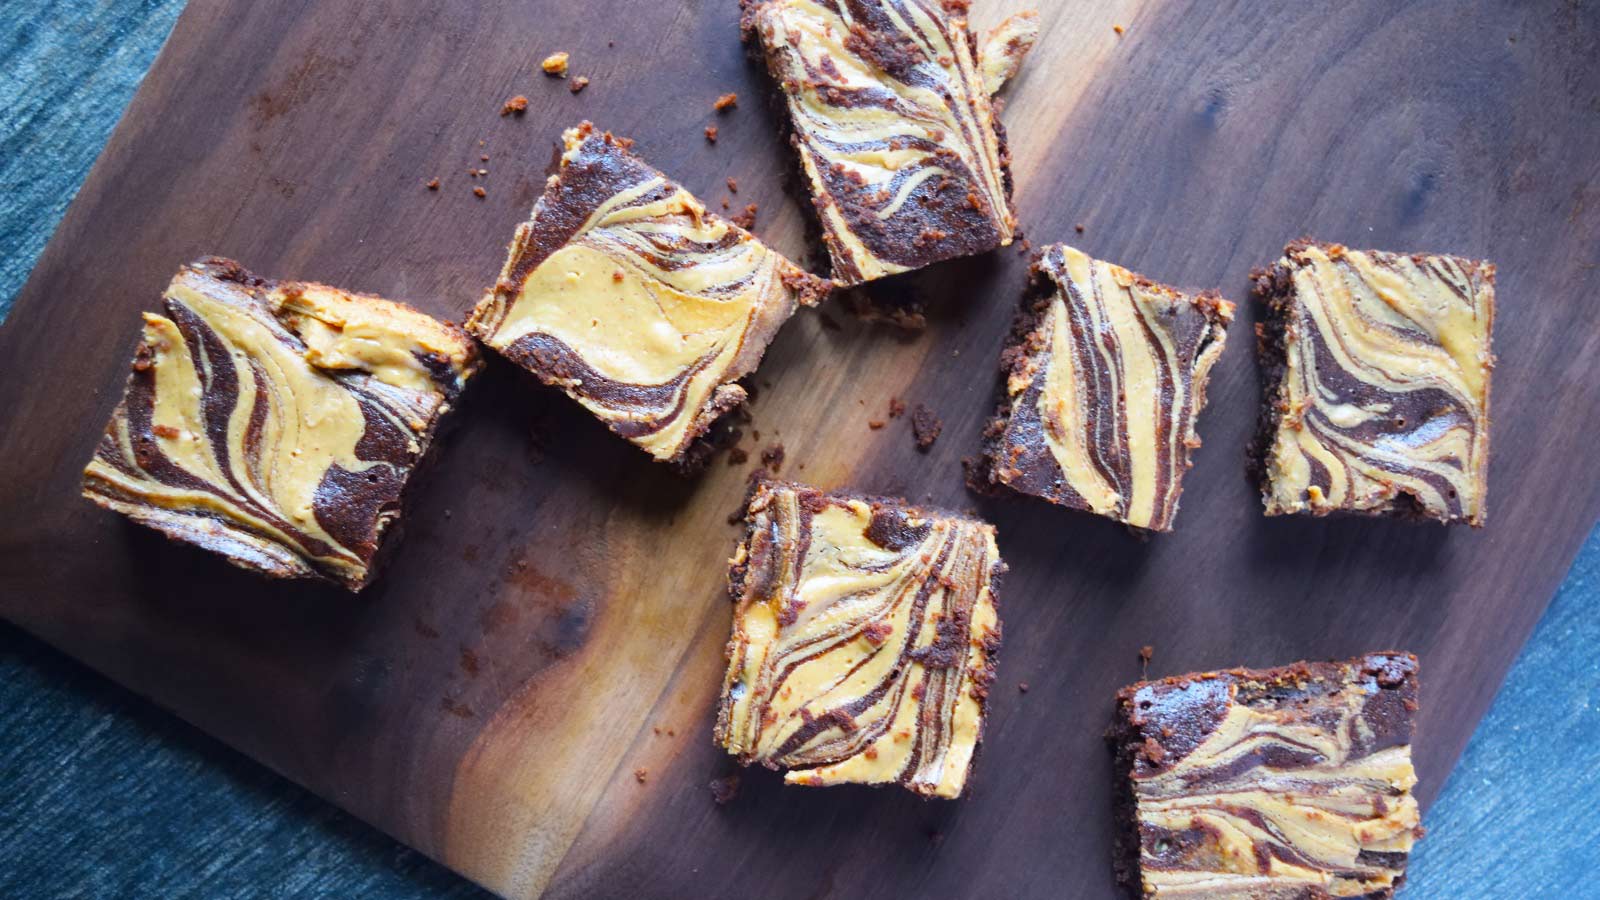 An overhead view of of some cut Peanut Butter Swirl Brownies laying on a wood cutting board.